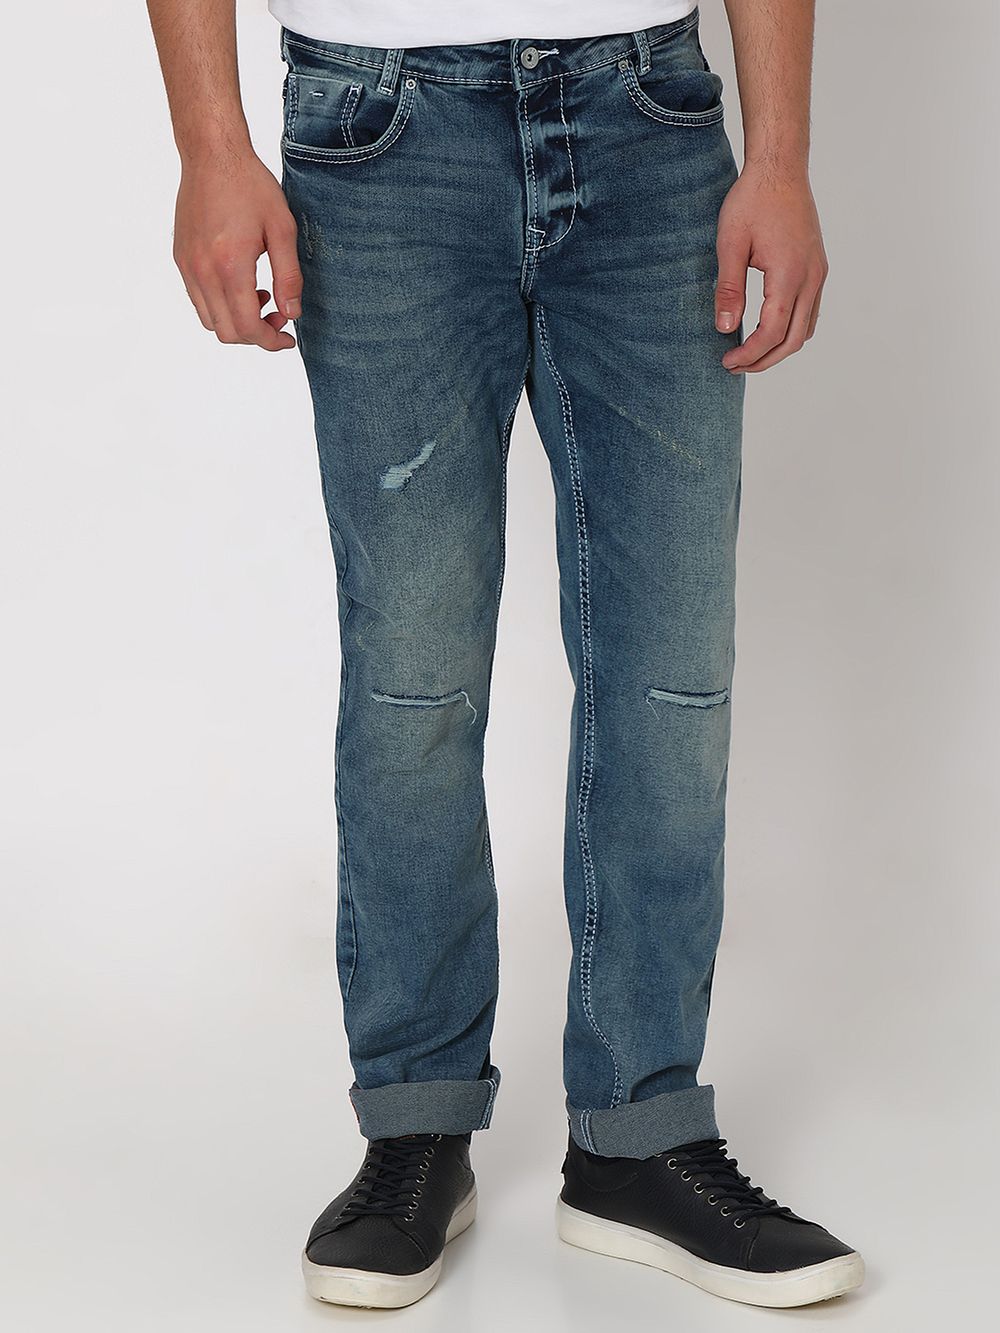 Tinted Super Slim Fit Distressed Stretch Jeans